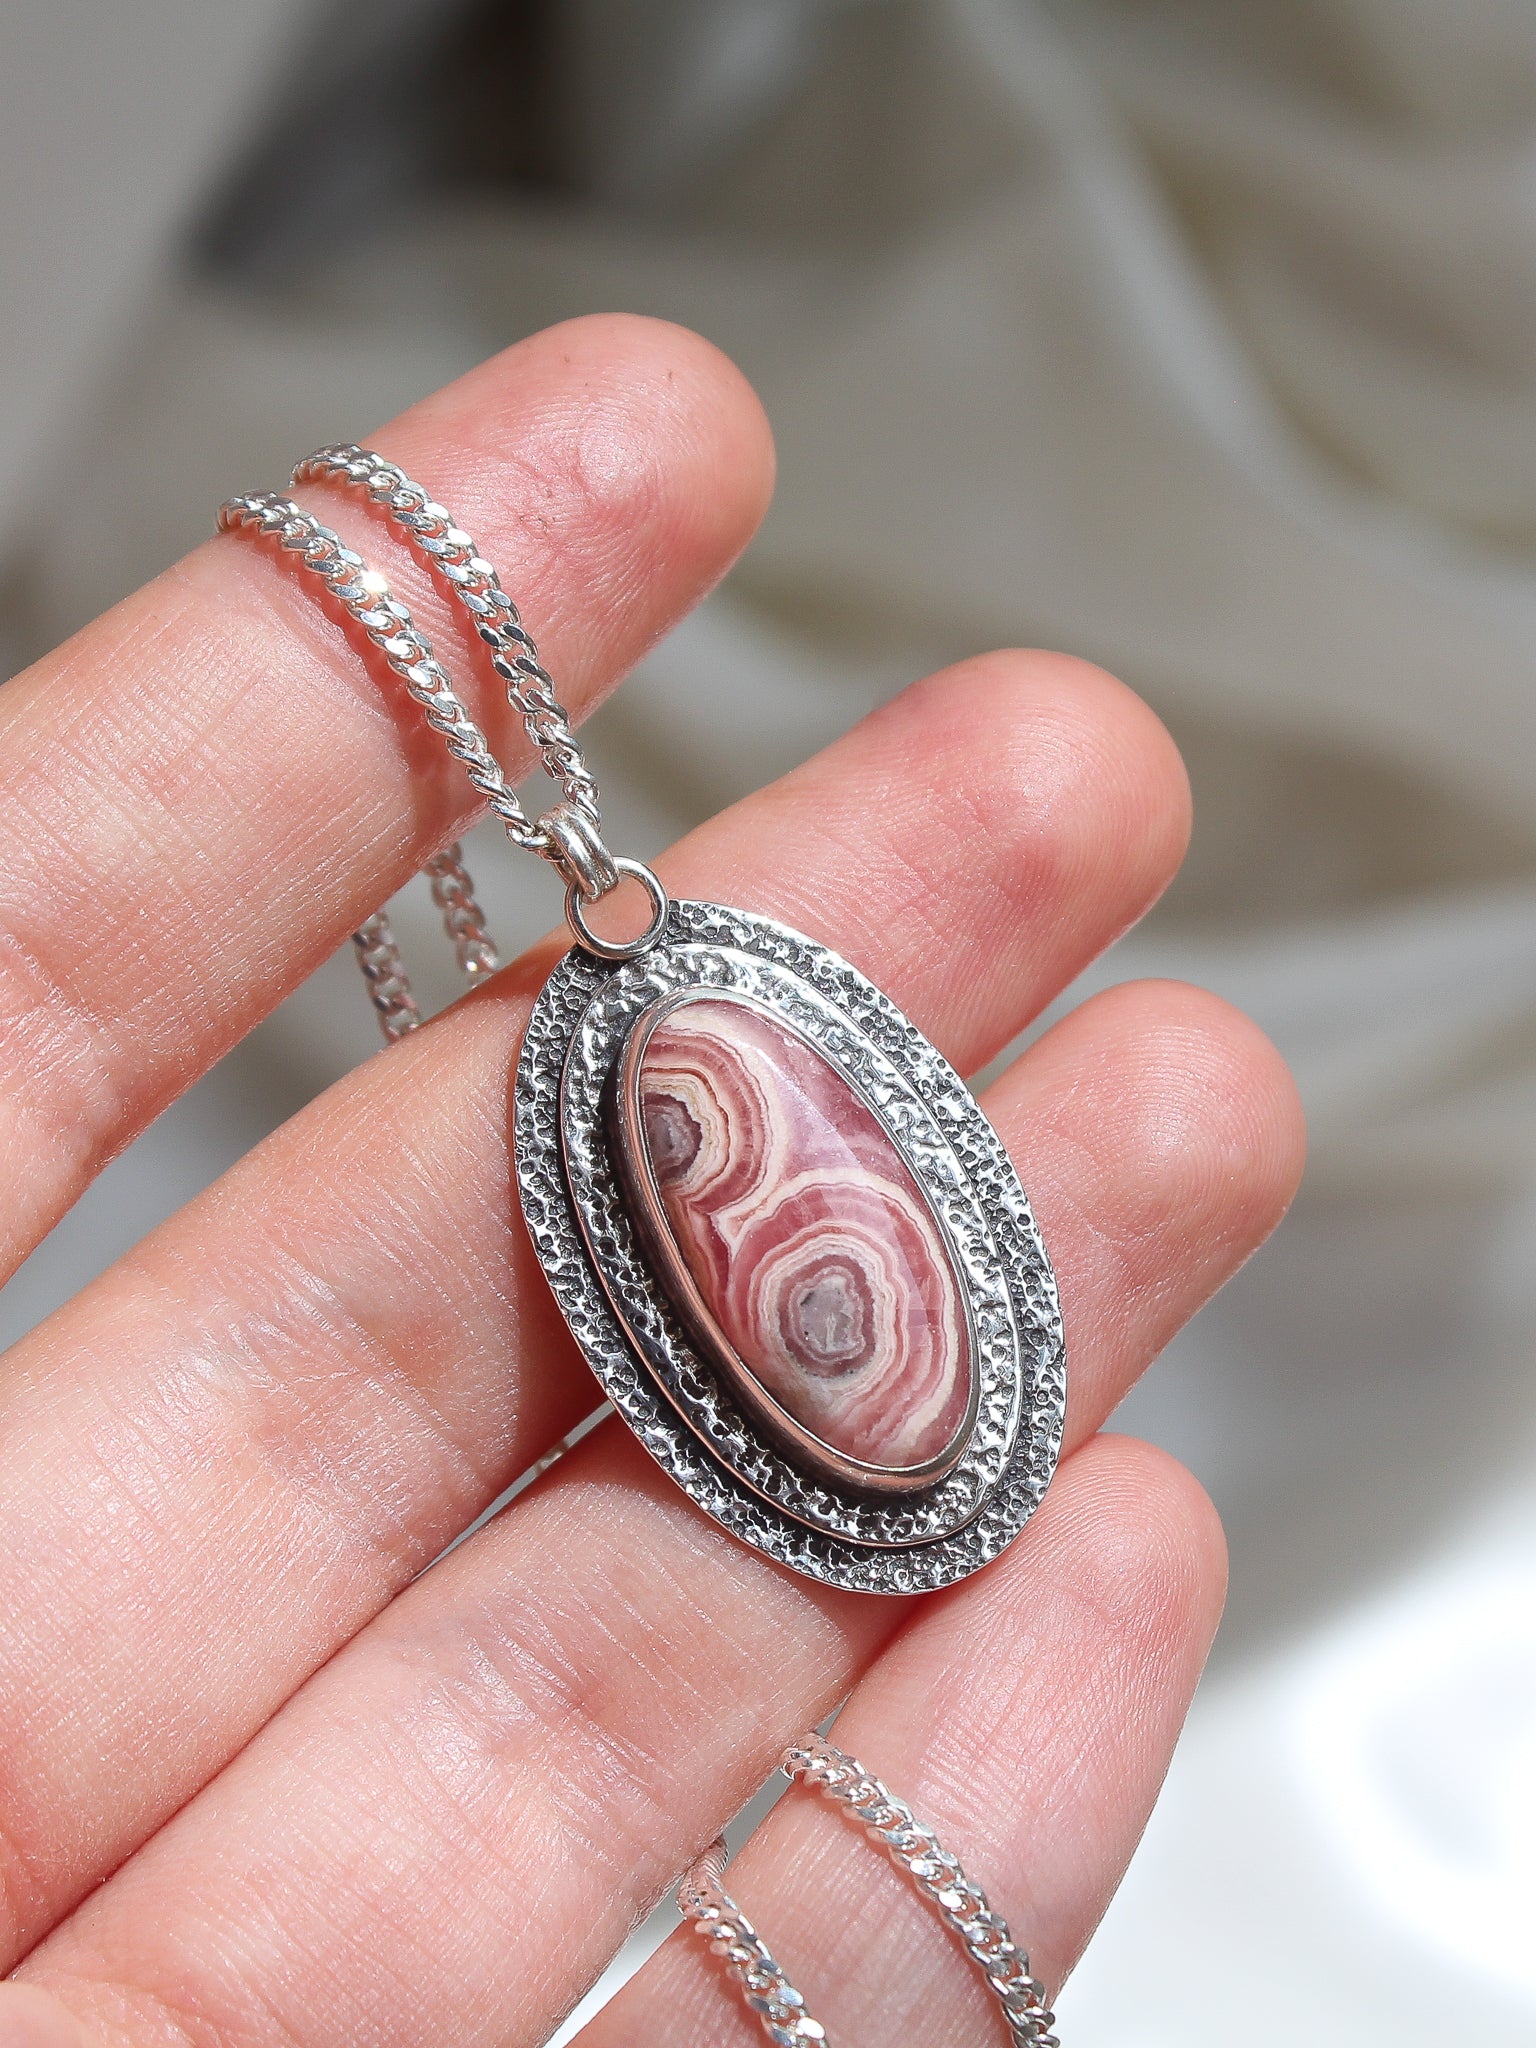 Handmade 925 sterling silver pendant with rhodochrosite stone, textured setting, lily and William jewelry